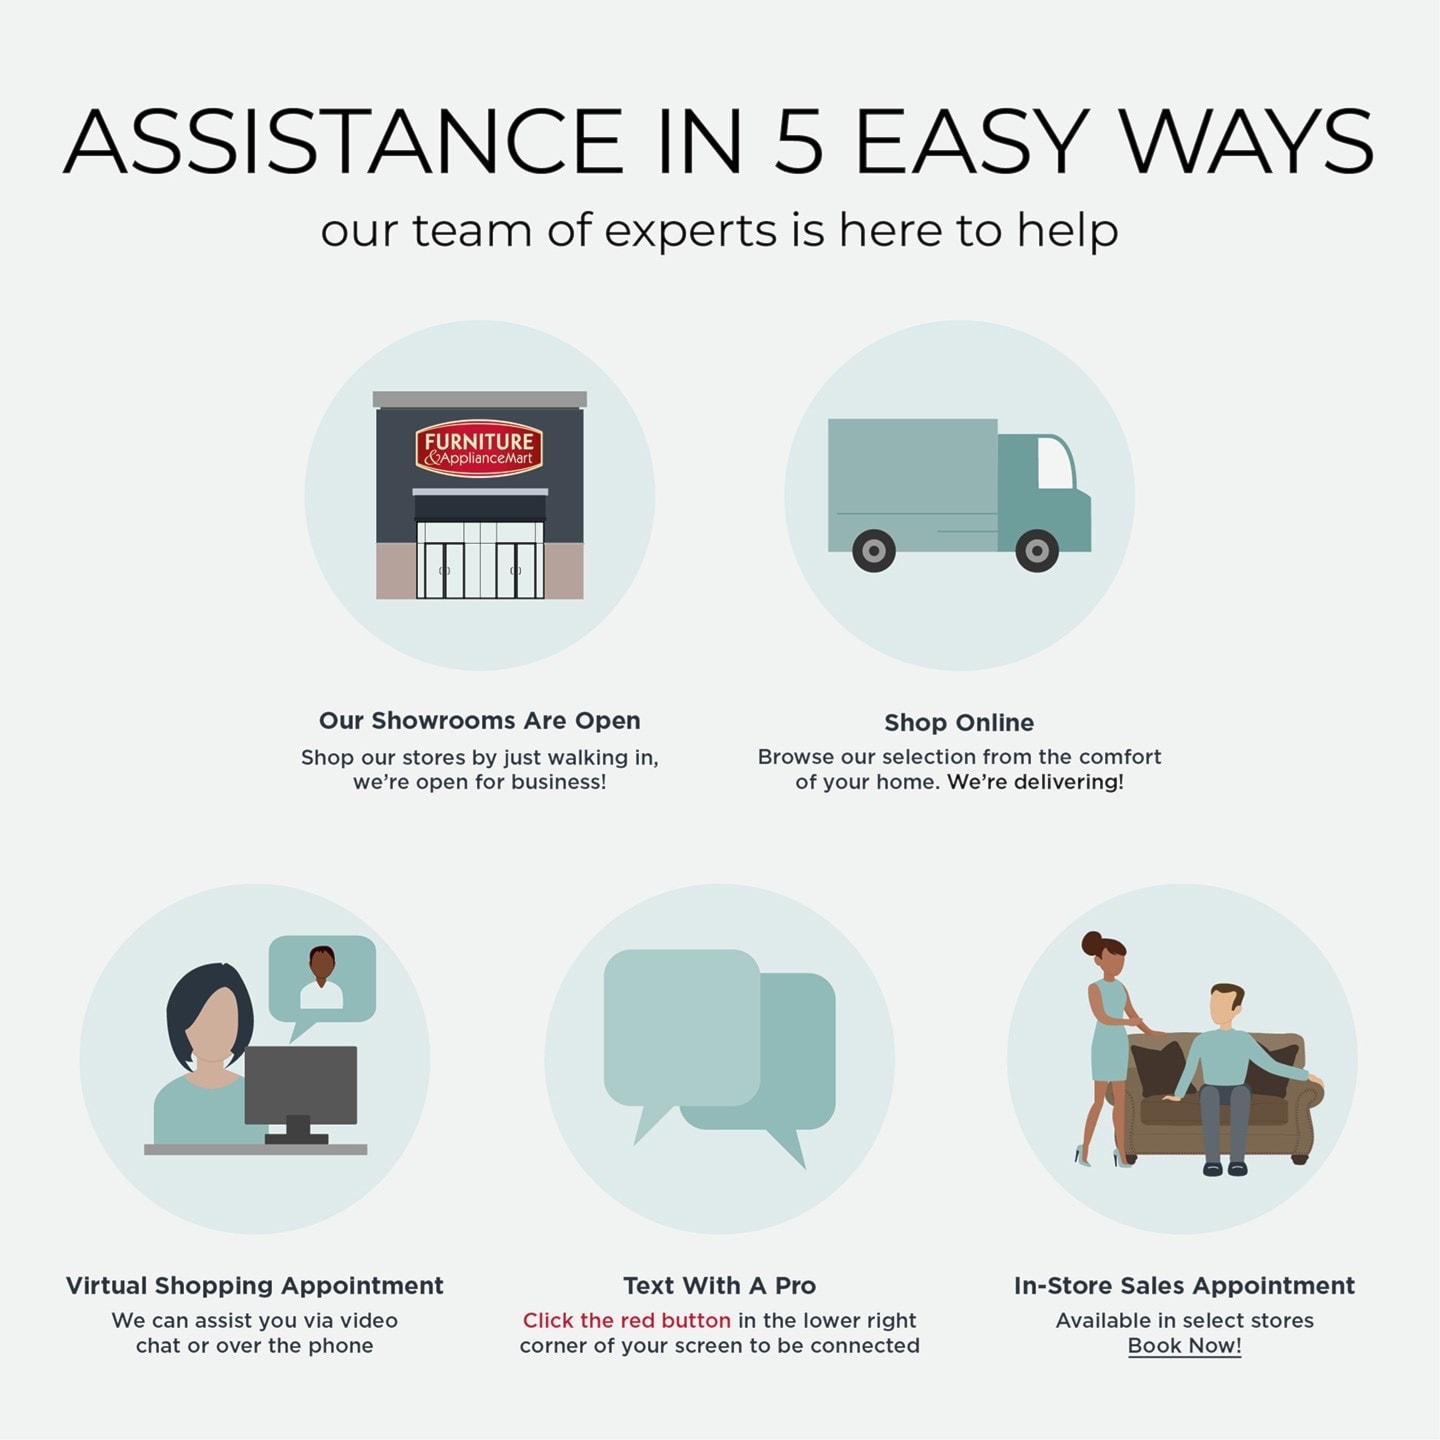 Assistance in 5 Easy Ways